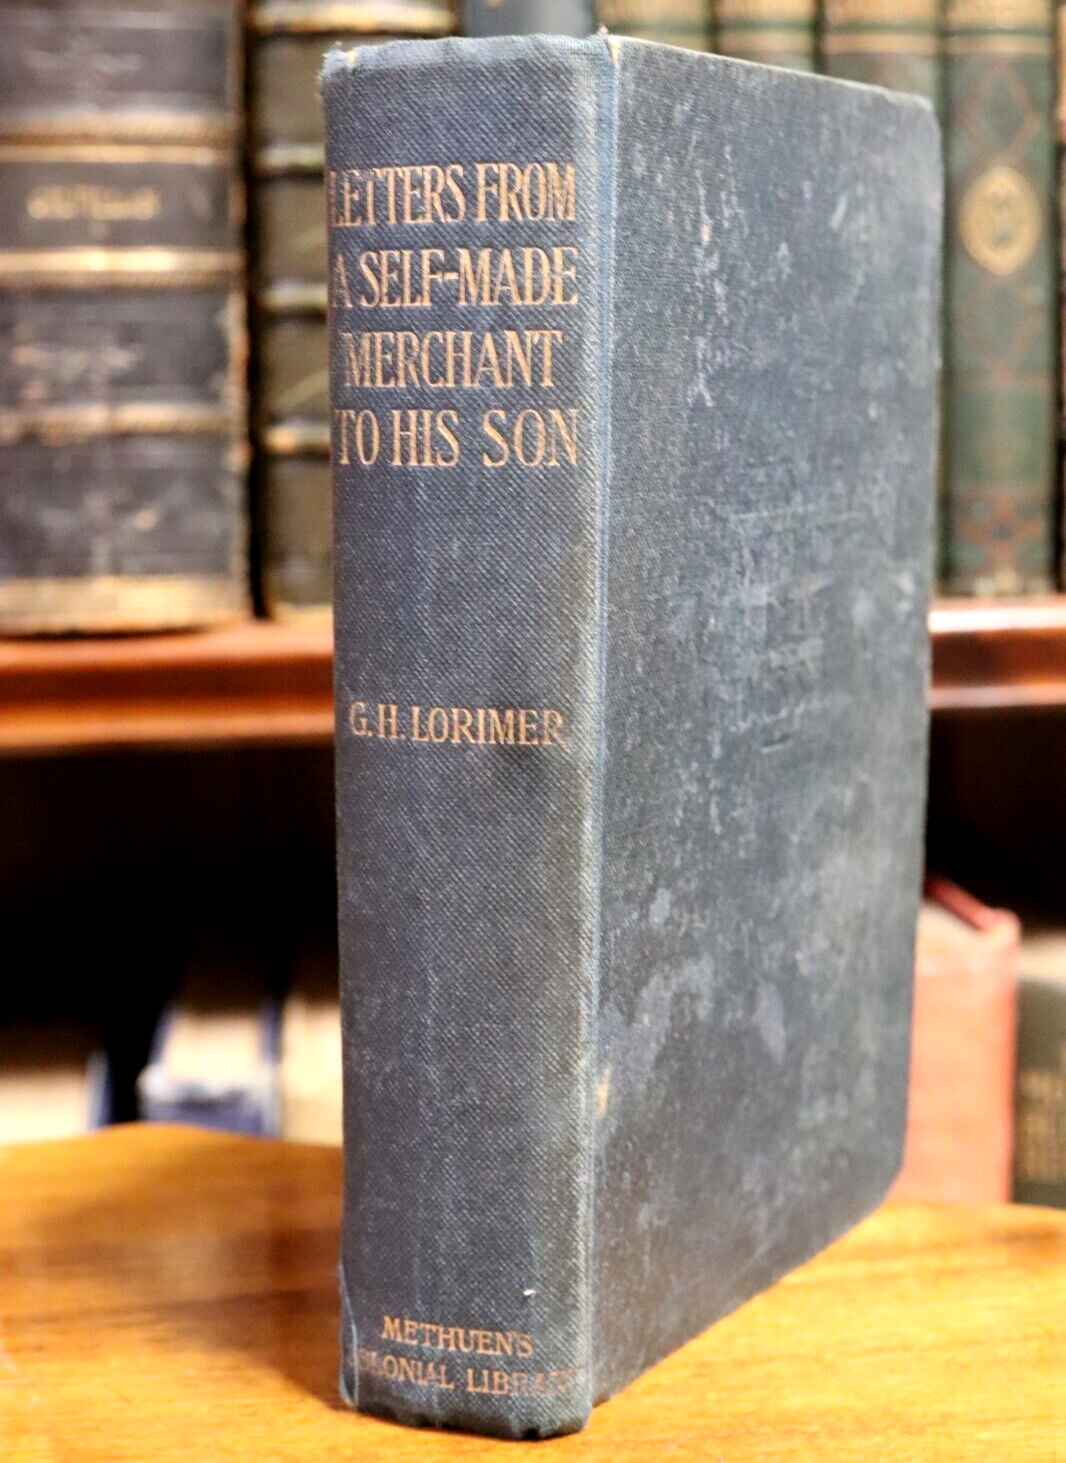 1903 Letters From A Self-Made Merchant To His Son Antique US History Book